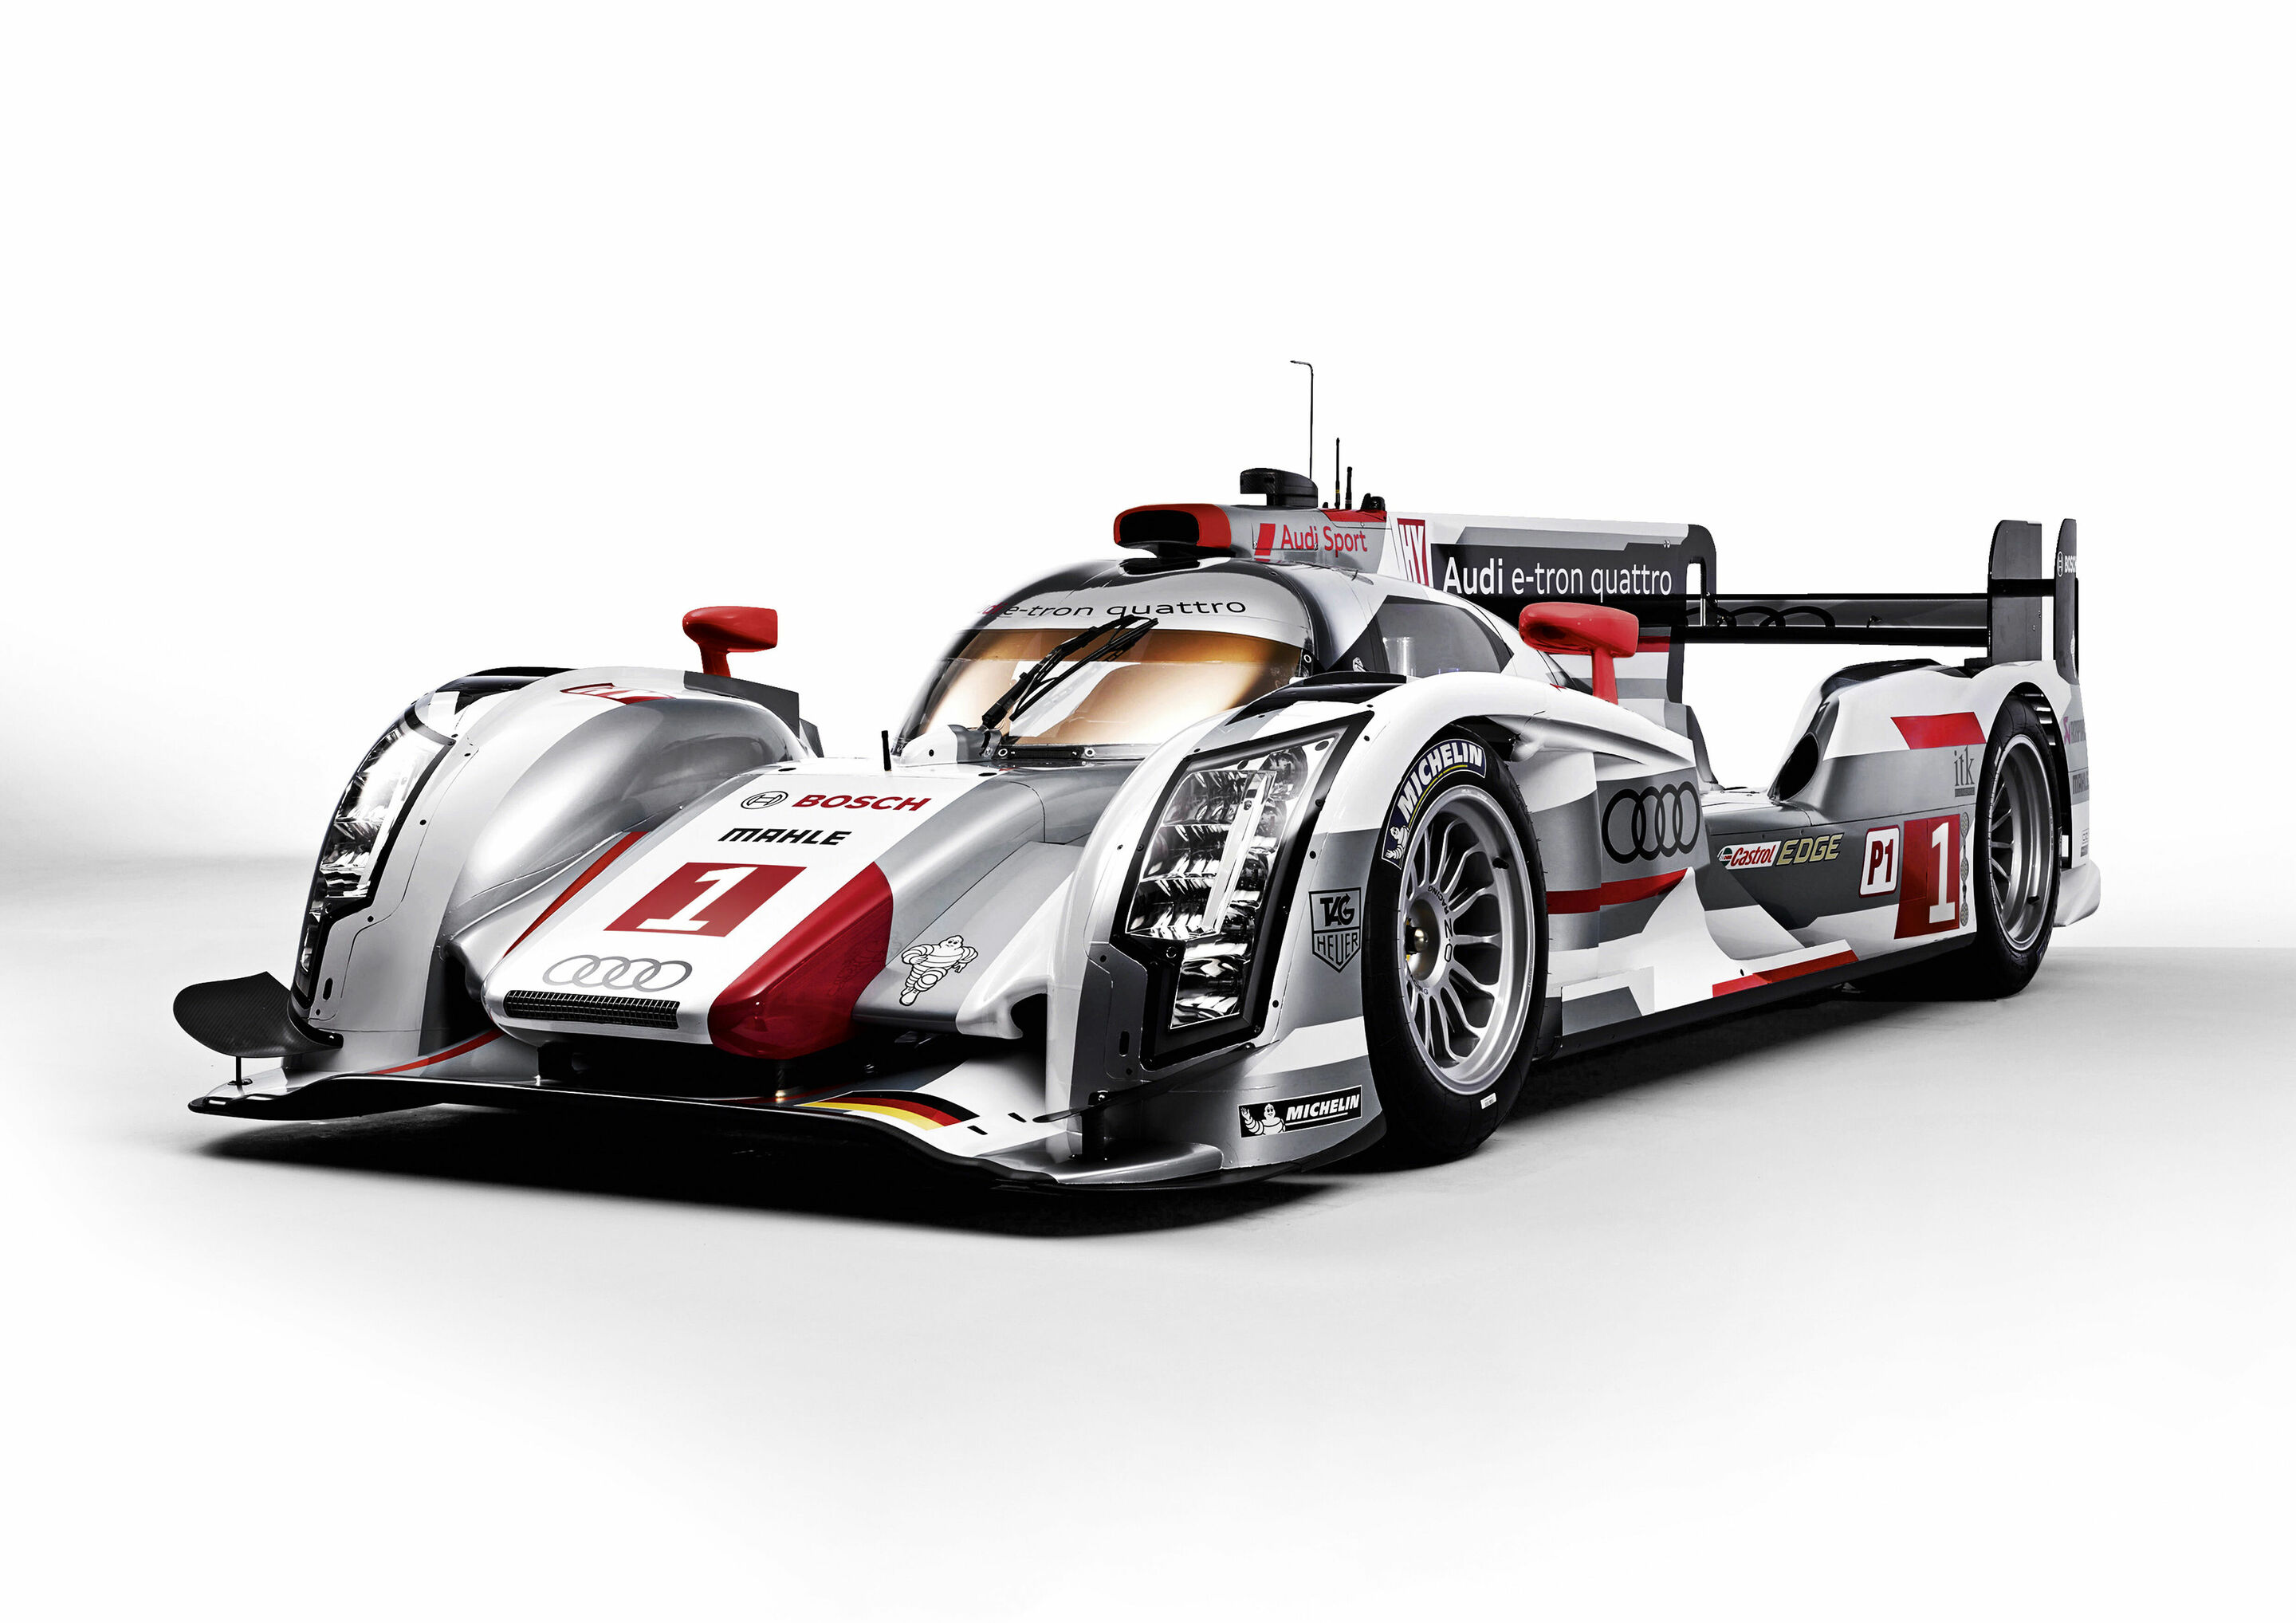 Audi launches title defense in the WEC